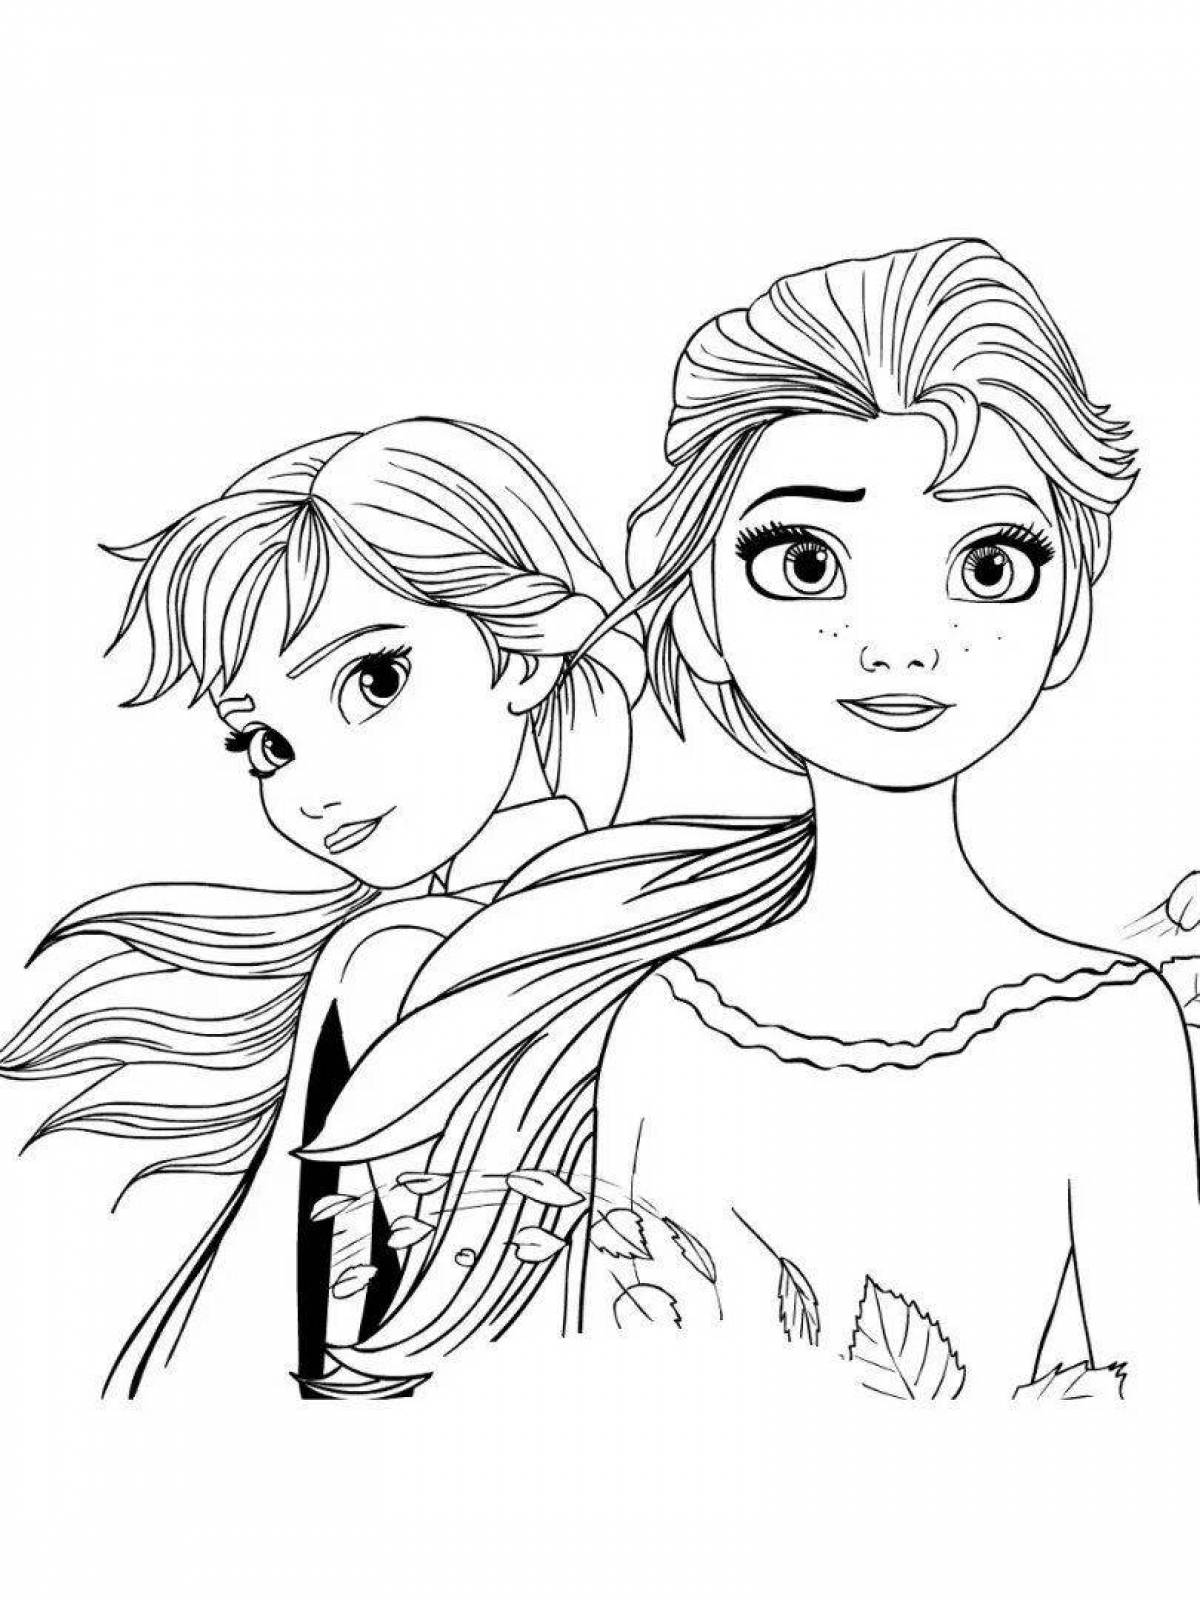 Delightful coloring 2 girls